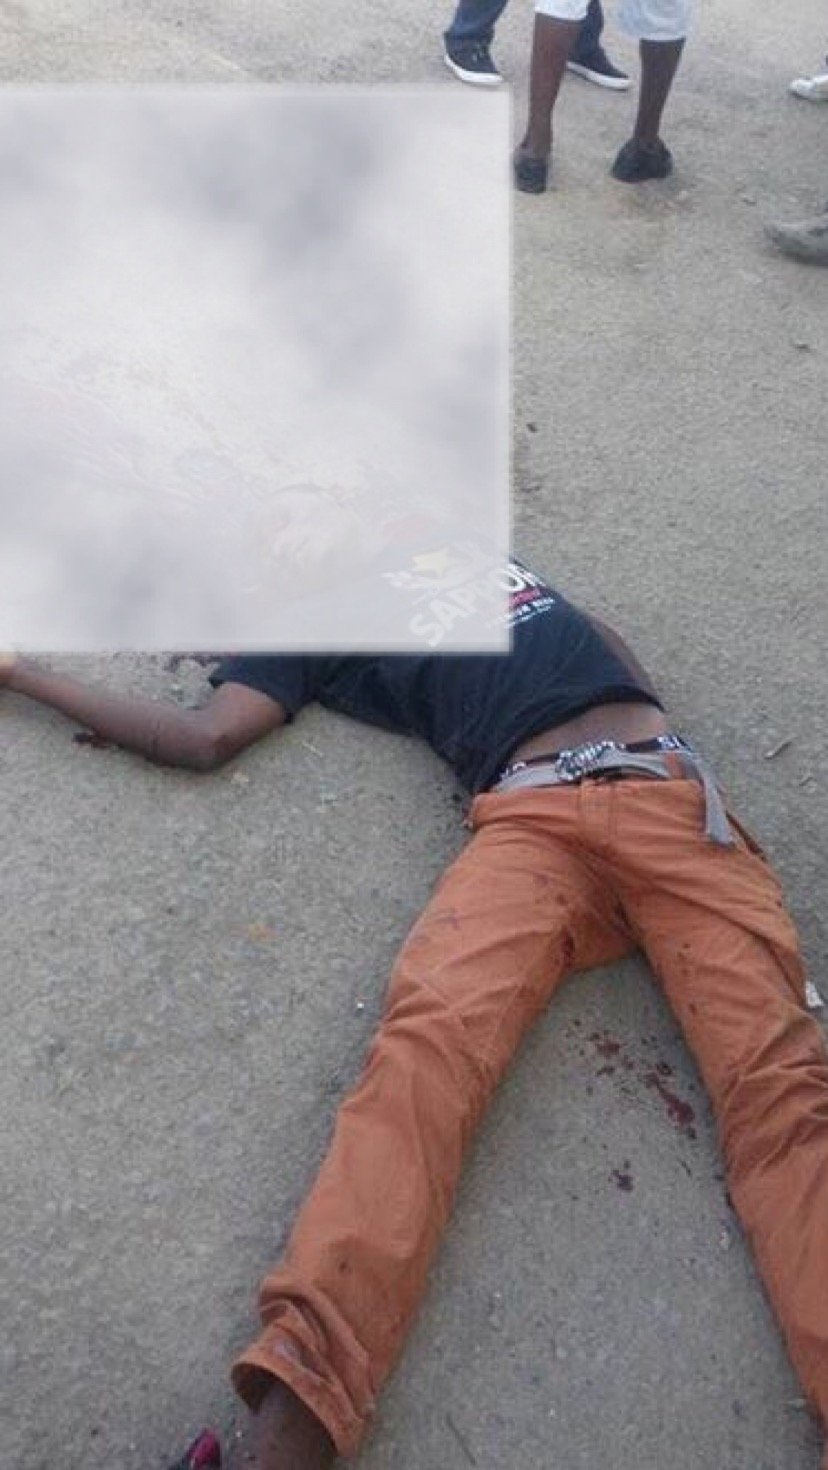 Notorious Eastleigh gang leader shot dead in broad daylight by Hessy (Photos) 